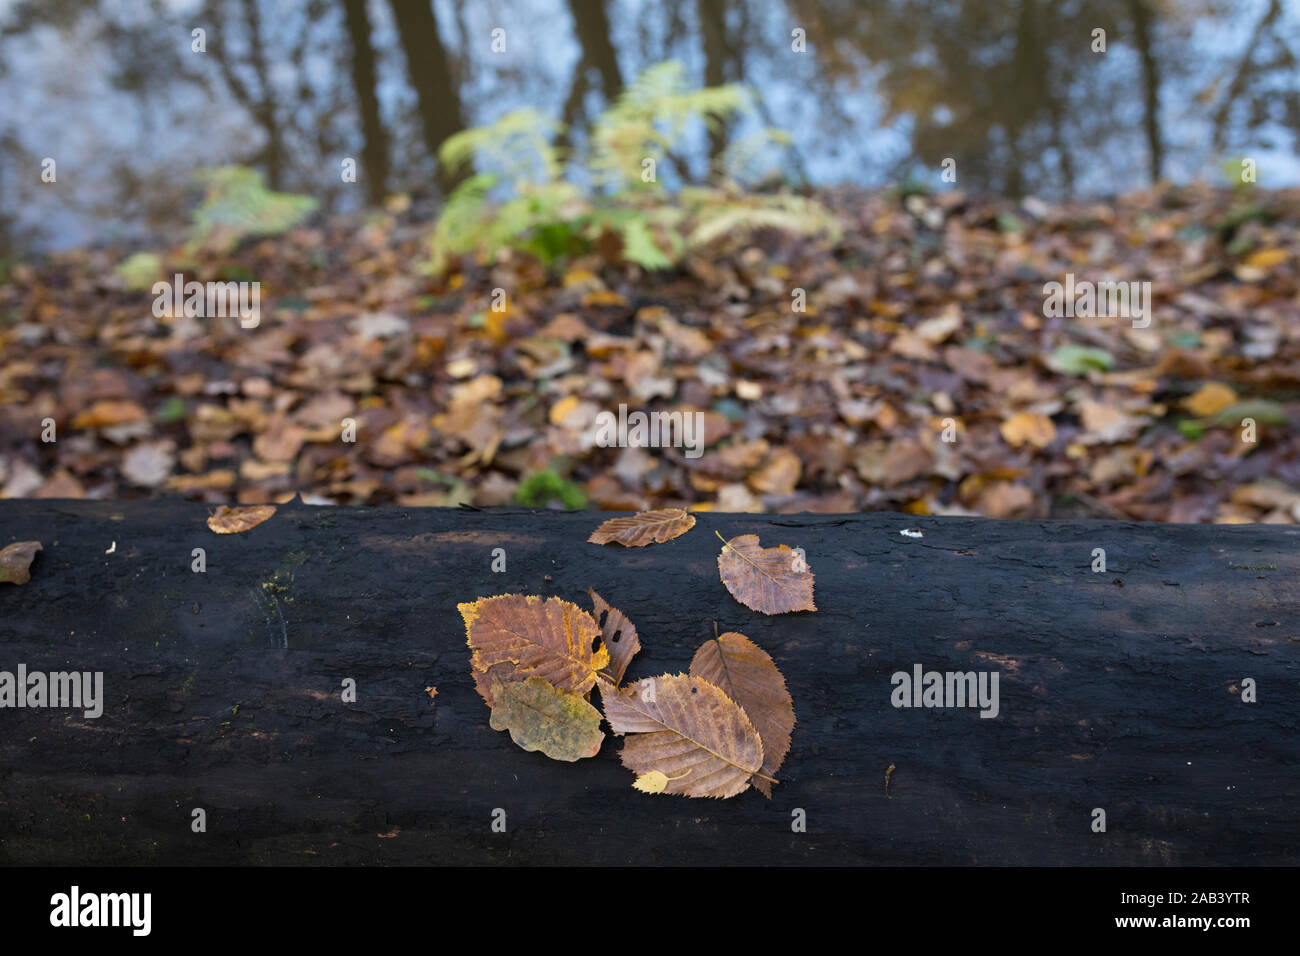 Fallen leaves lying on the trunk of a fallen tree along streamlet 'Leubeek' at nature reserve 'Leudal', Netherlands Stock Photo